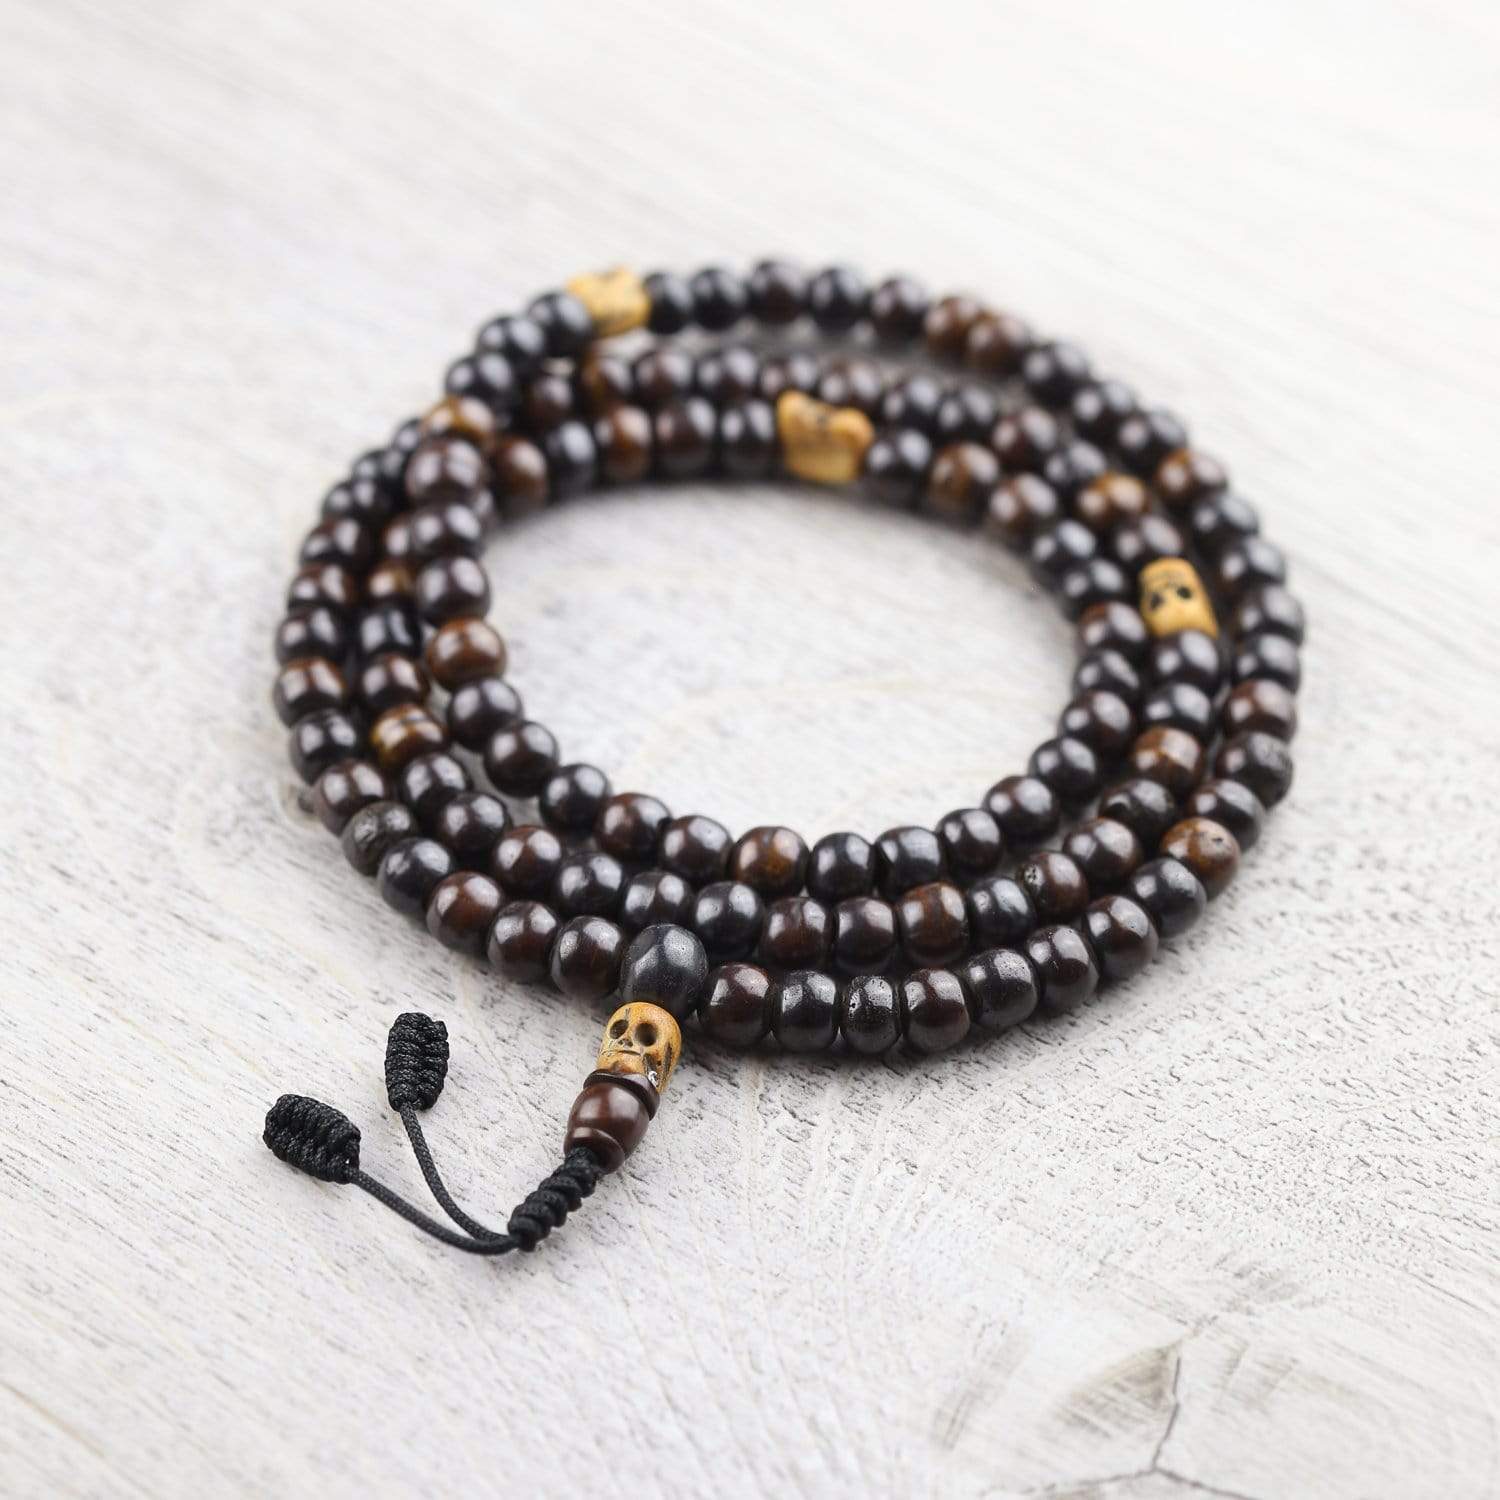 Malas and Meditation – DharmaCrafts